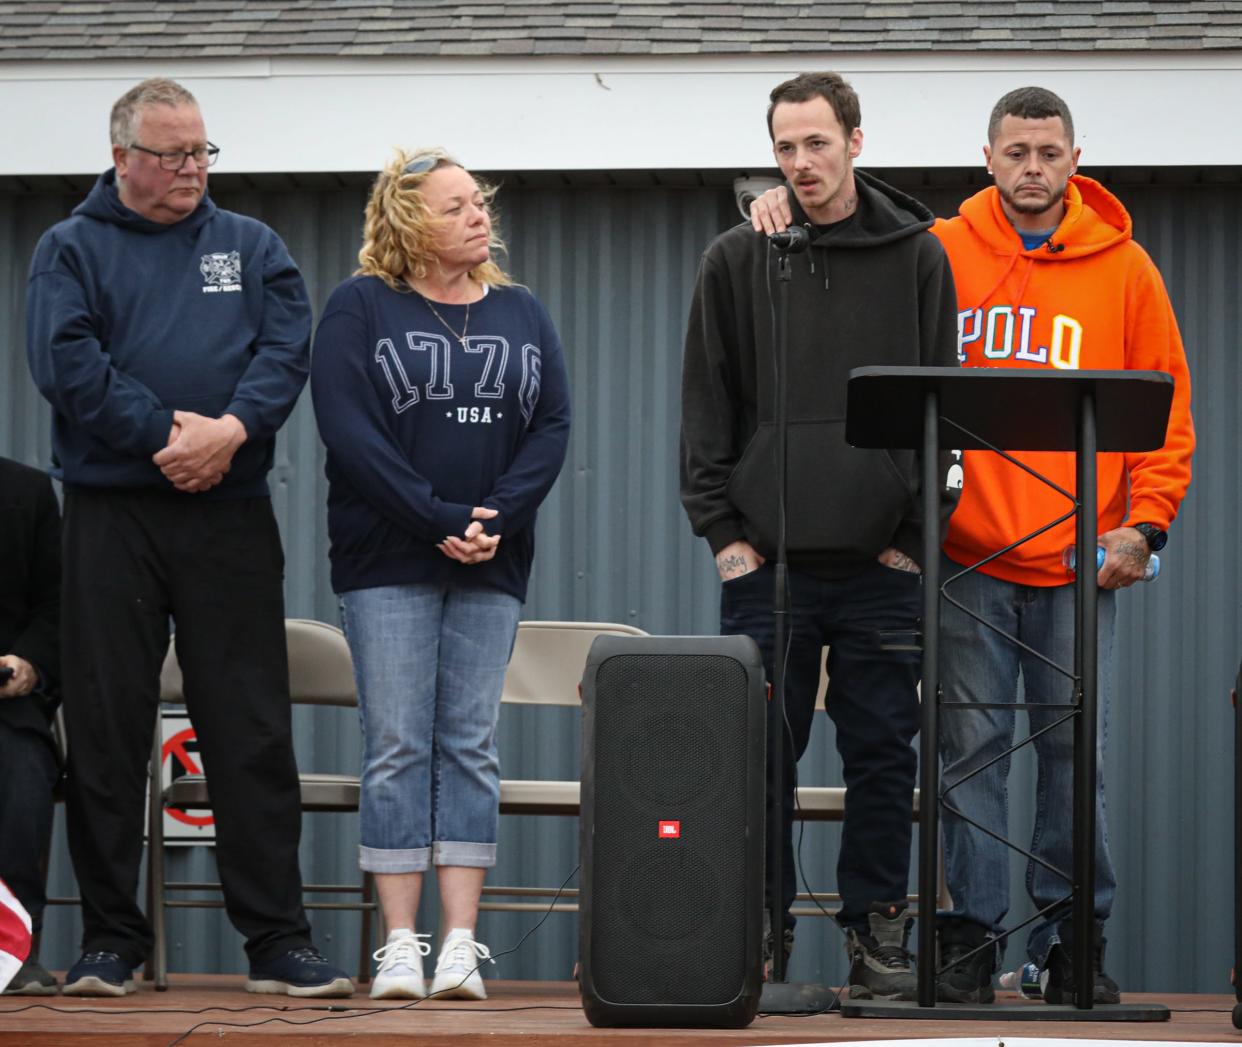 Nicholas Phillips and Michael Hatfield (right), both uncles to Alanah and Zayn Phillips, speak to the crowd at a vigil held at the Swan Boat Club, Newport on Friday. On the left is State Rep. Jamie Thompson, R-Brownstown Township, and Robert Cousino, Berlin Township fire chief.